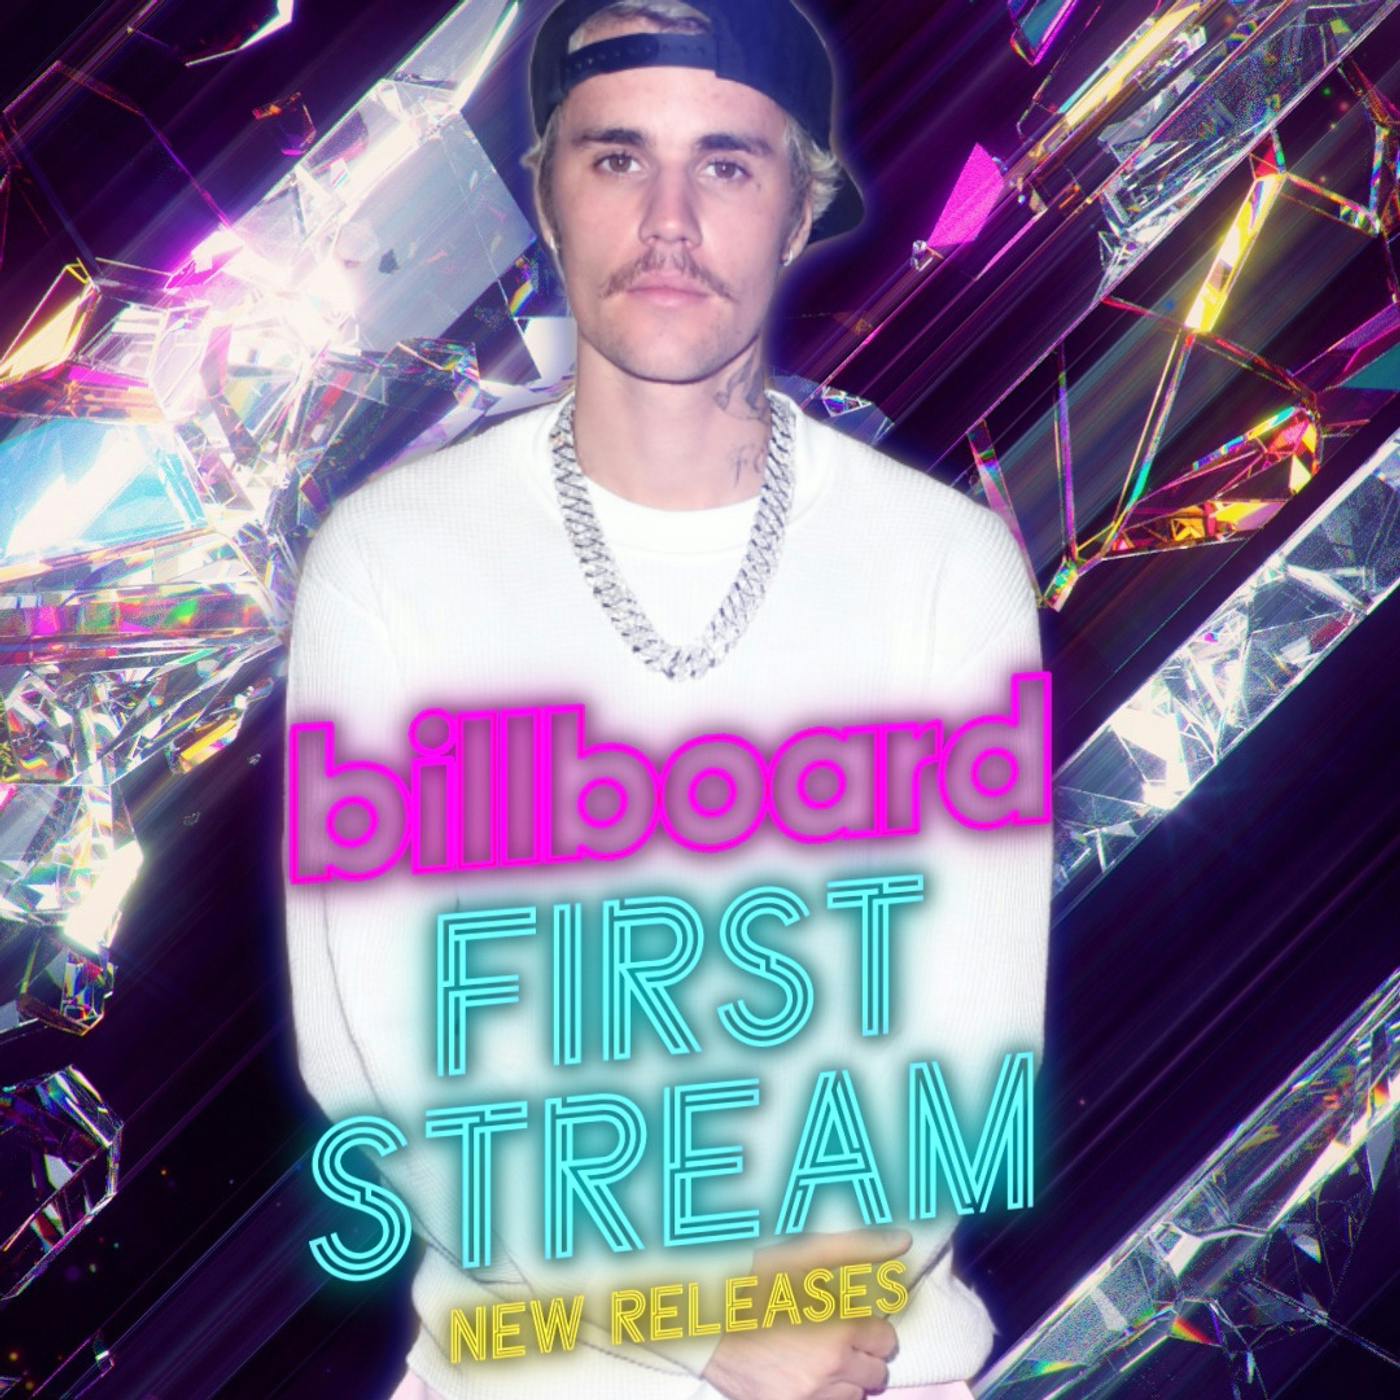 Bieber’s Back With New Album ‘Changes’ & More: Billboard's First Stream  (2/14/2020)